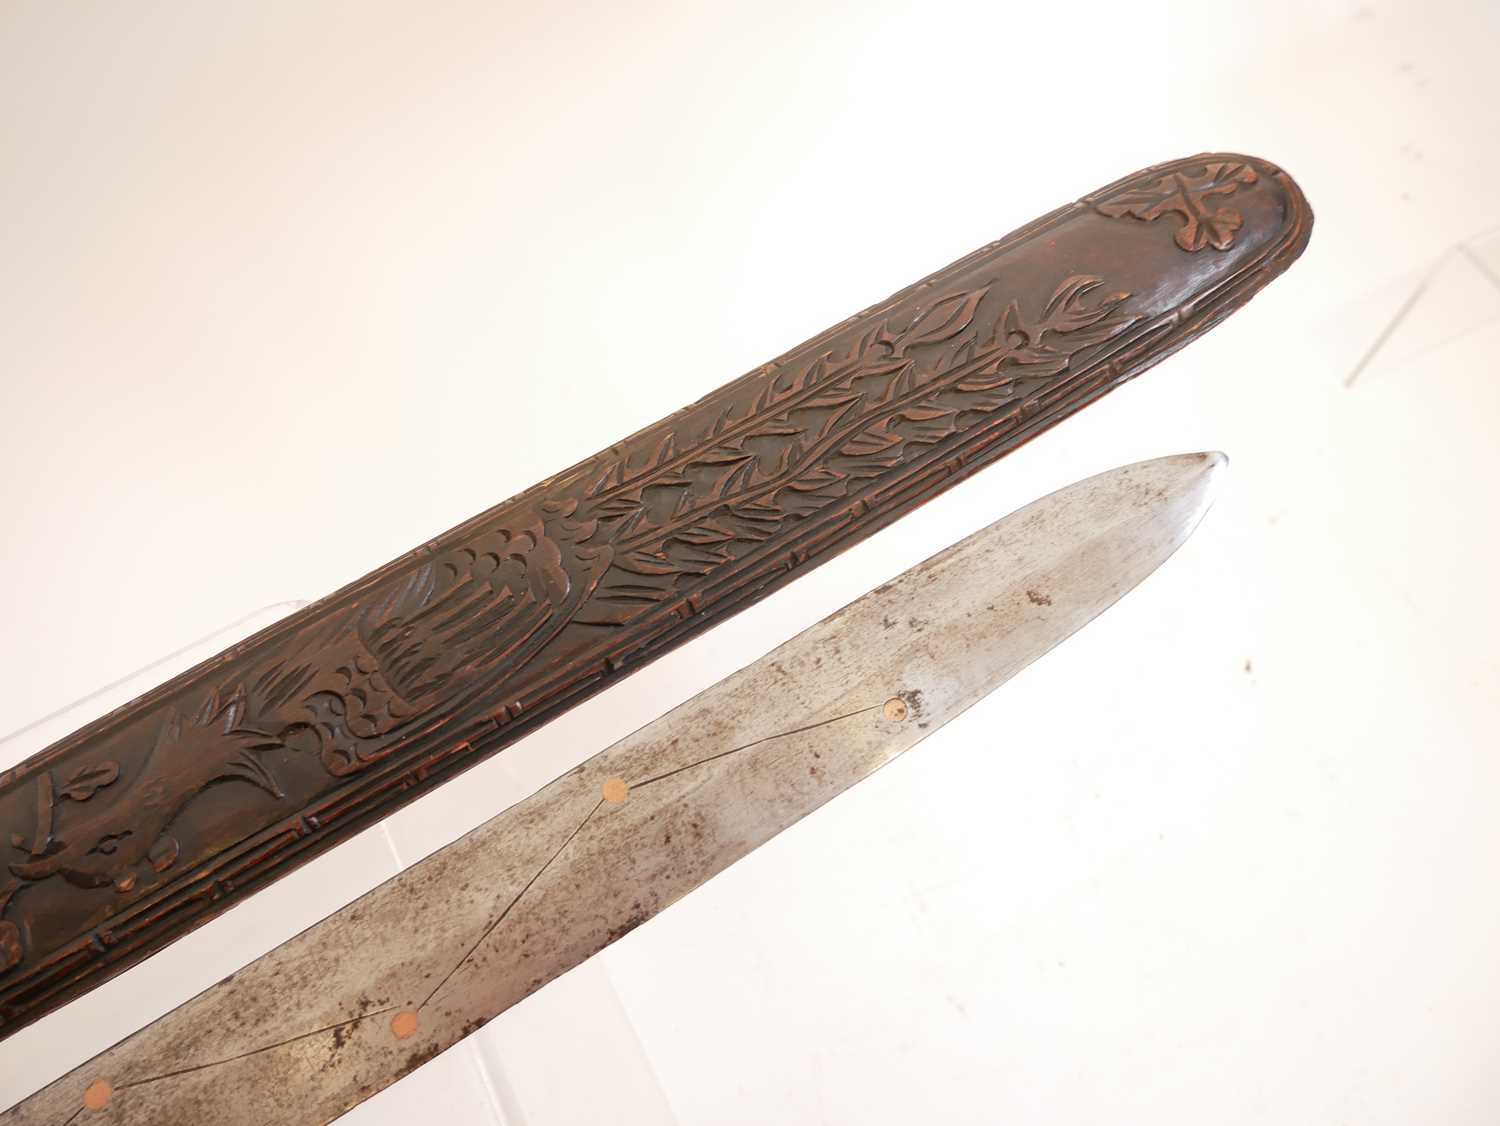 Chinese double edged sword, with copper studded blade, brass guard and carved grip and scabbard. - Image 5 of 7